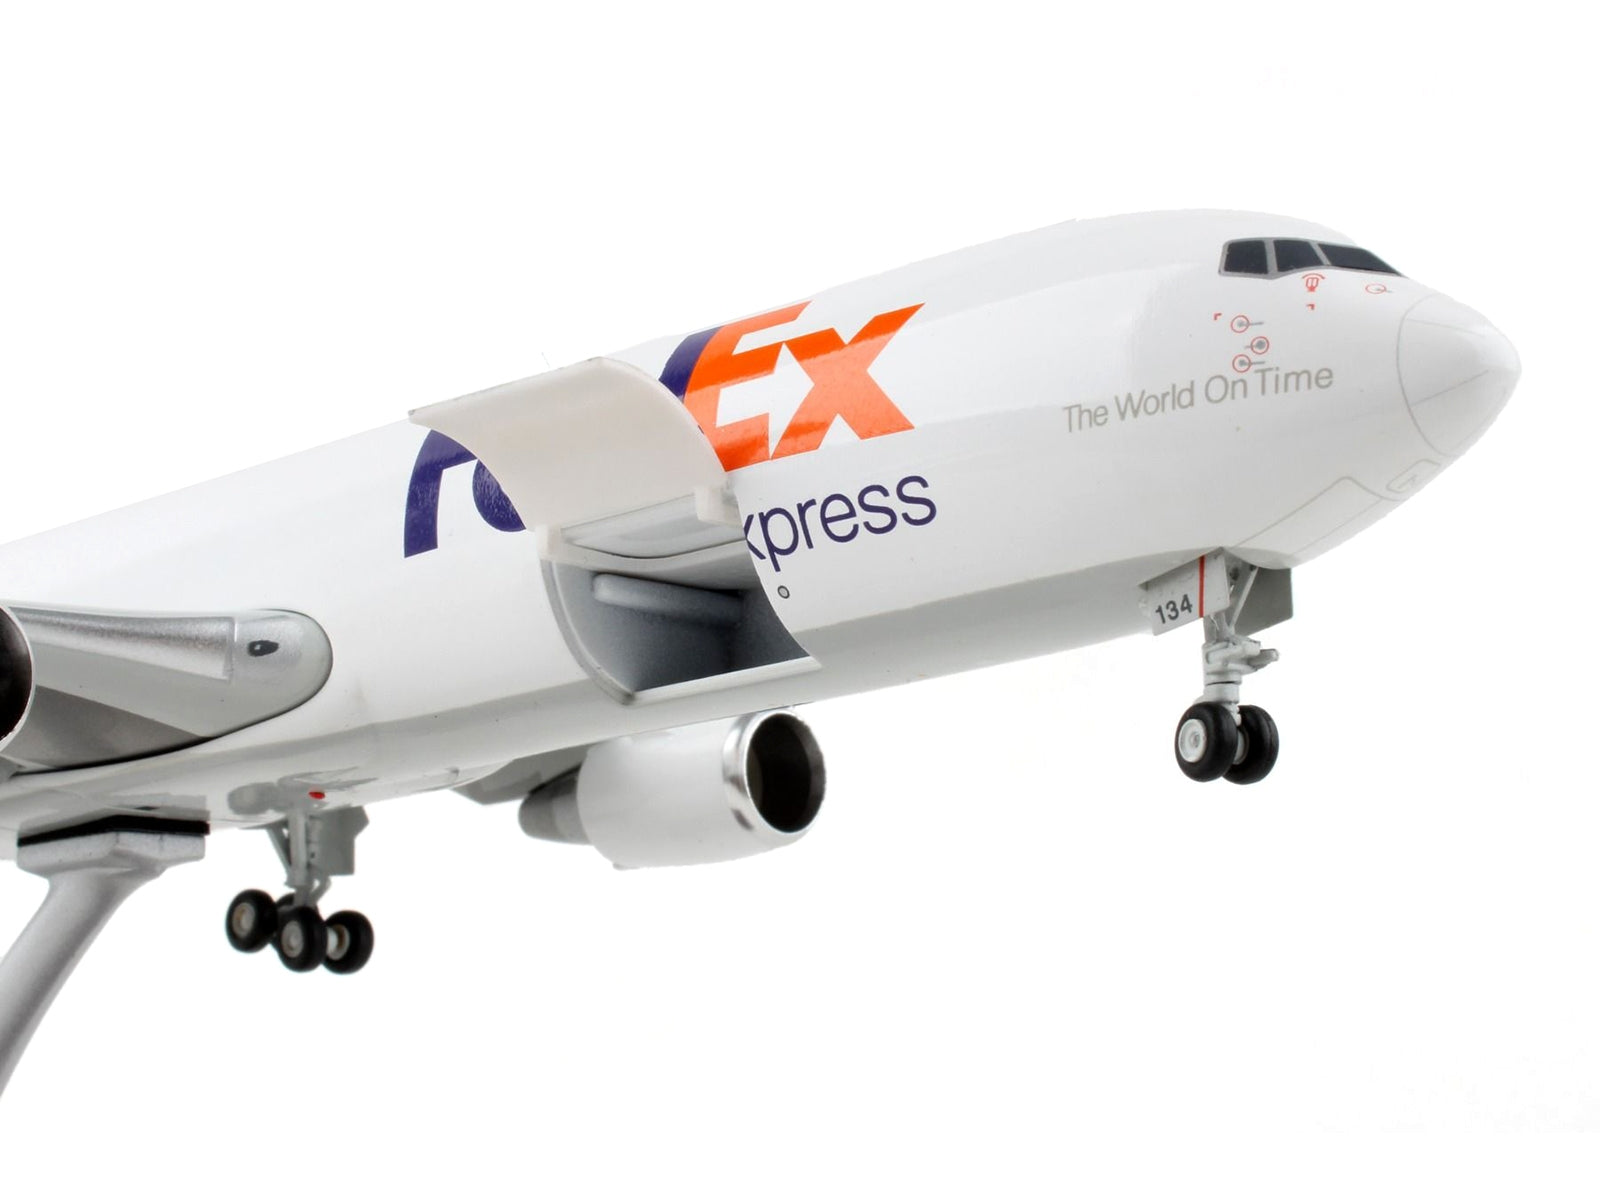 Boeing 767-300F Commercial Aircraft "Federal Express" White with Purple Tail "Interactive Series" 1/200 Diecast Model Airplane by GeminiJets